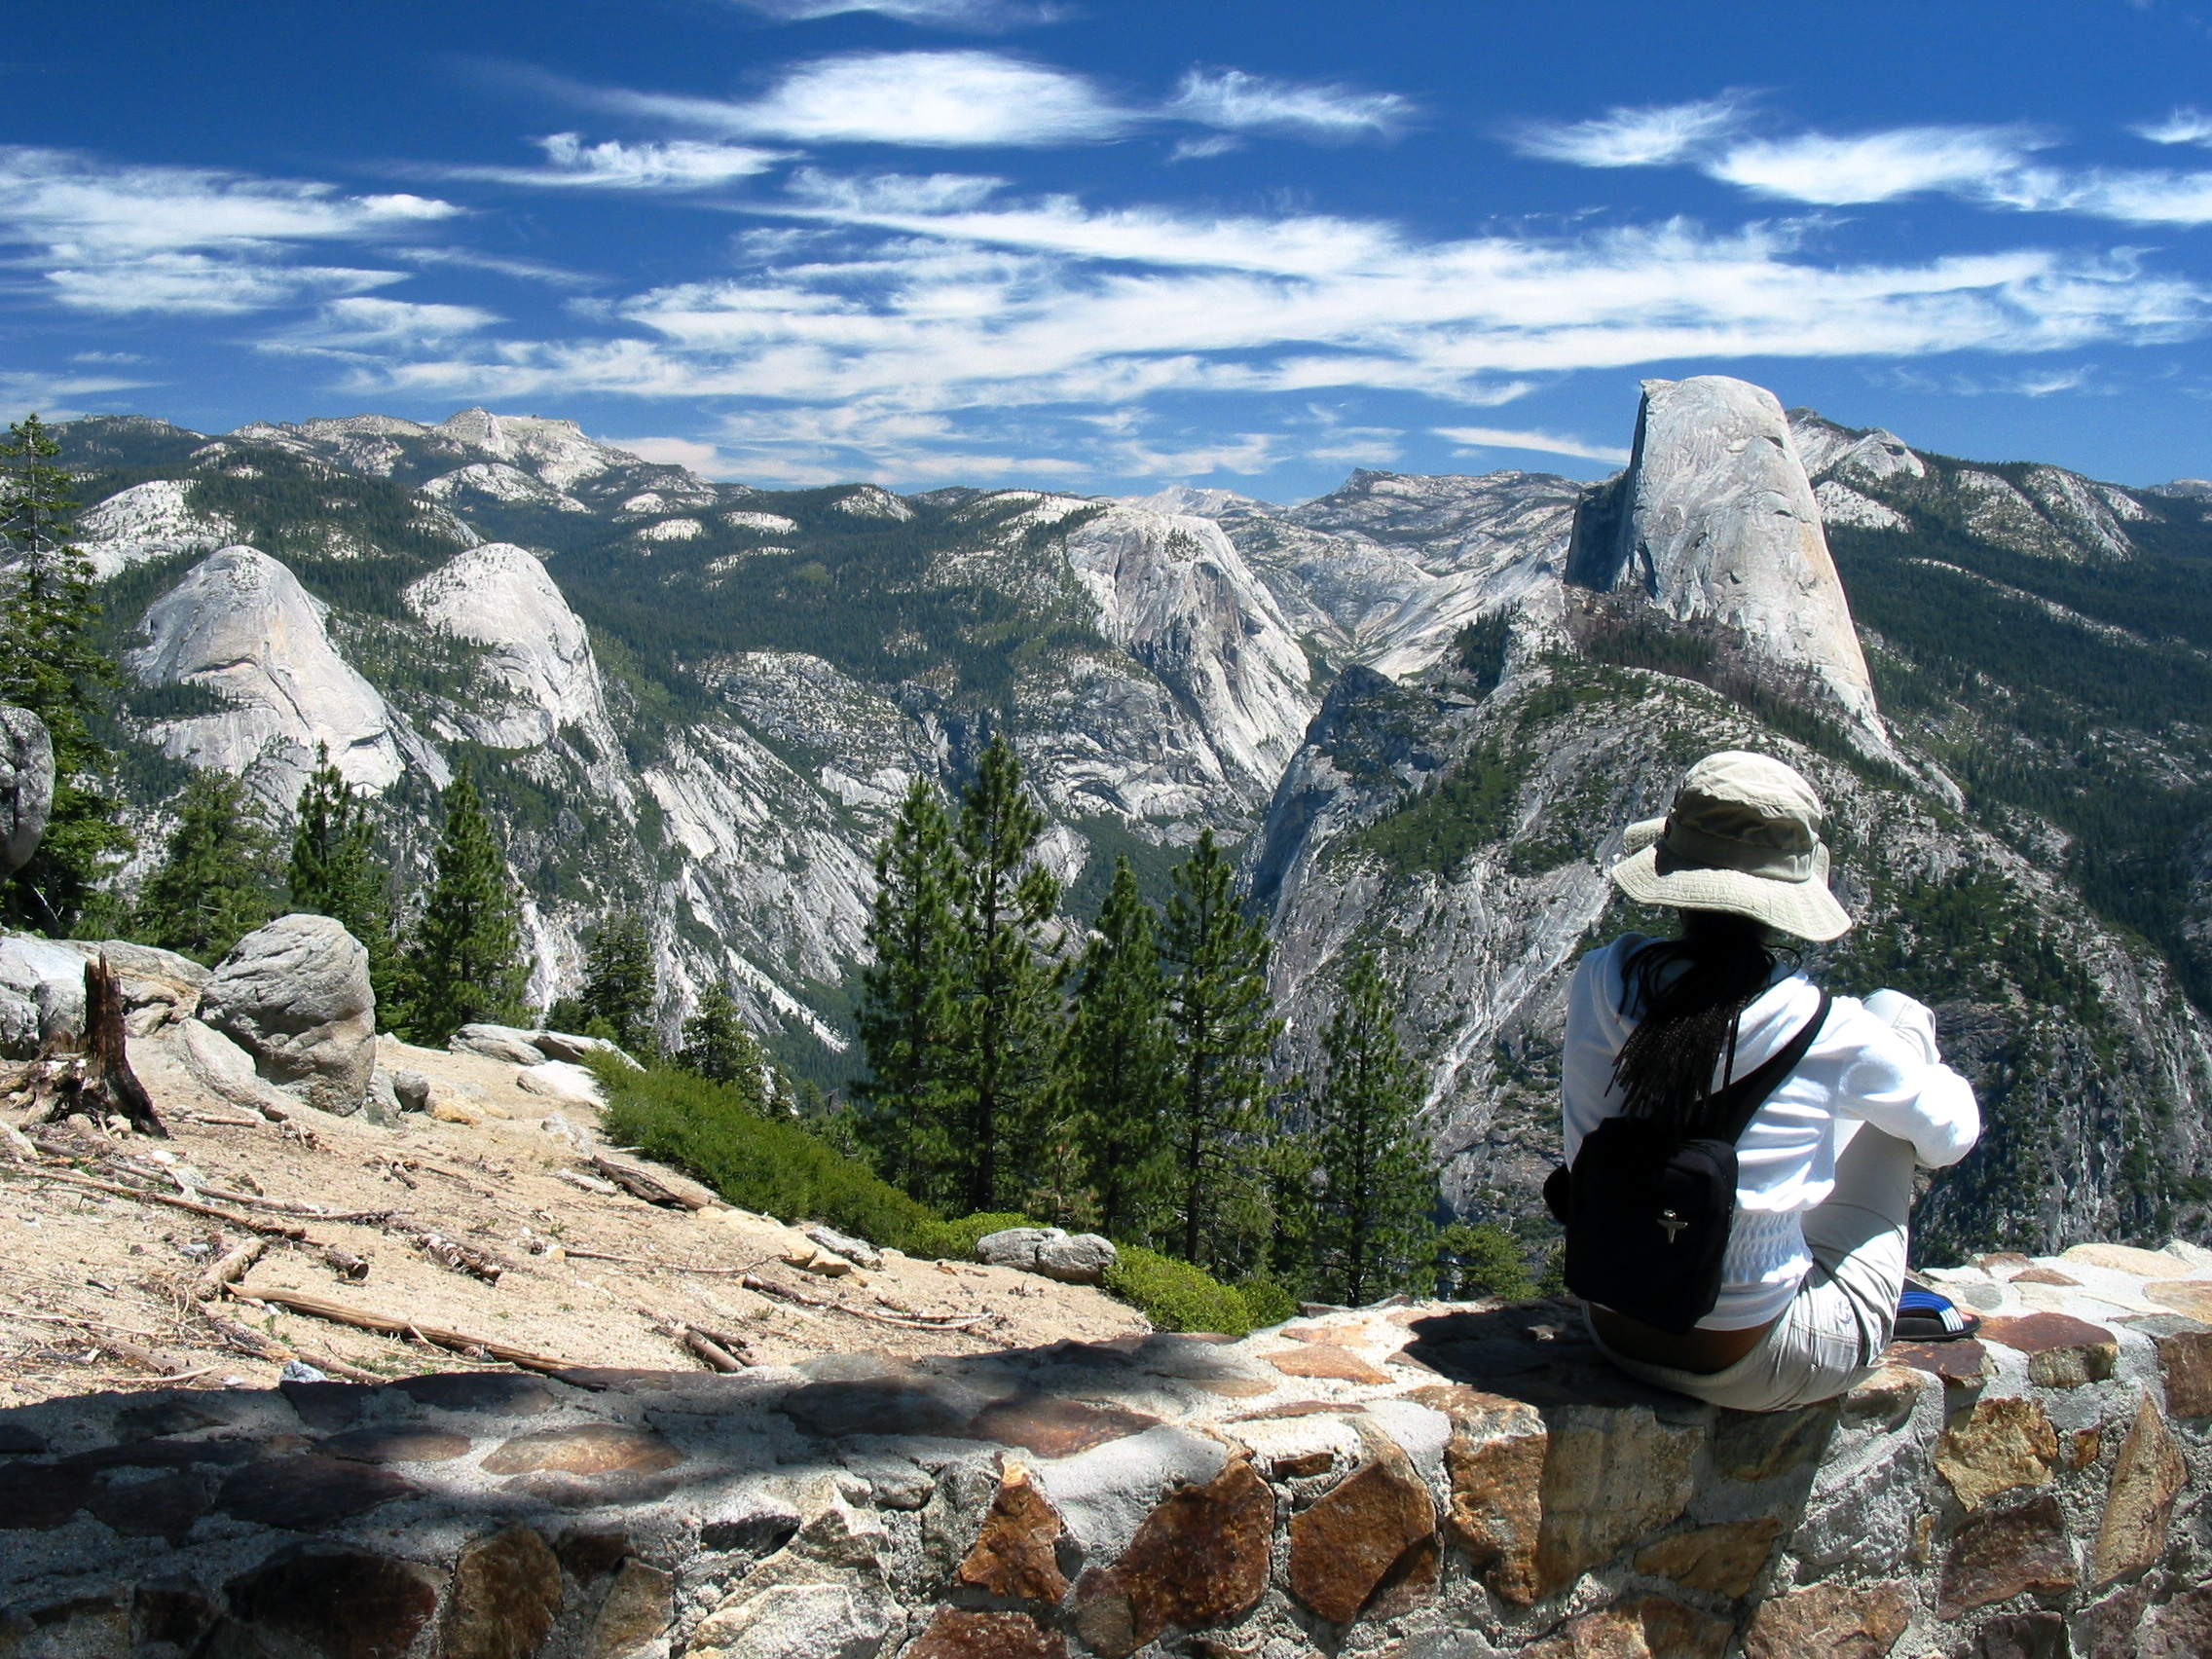 Take a guided tour with the Southern Yosemite Mountain Guides